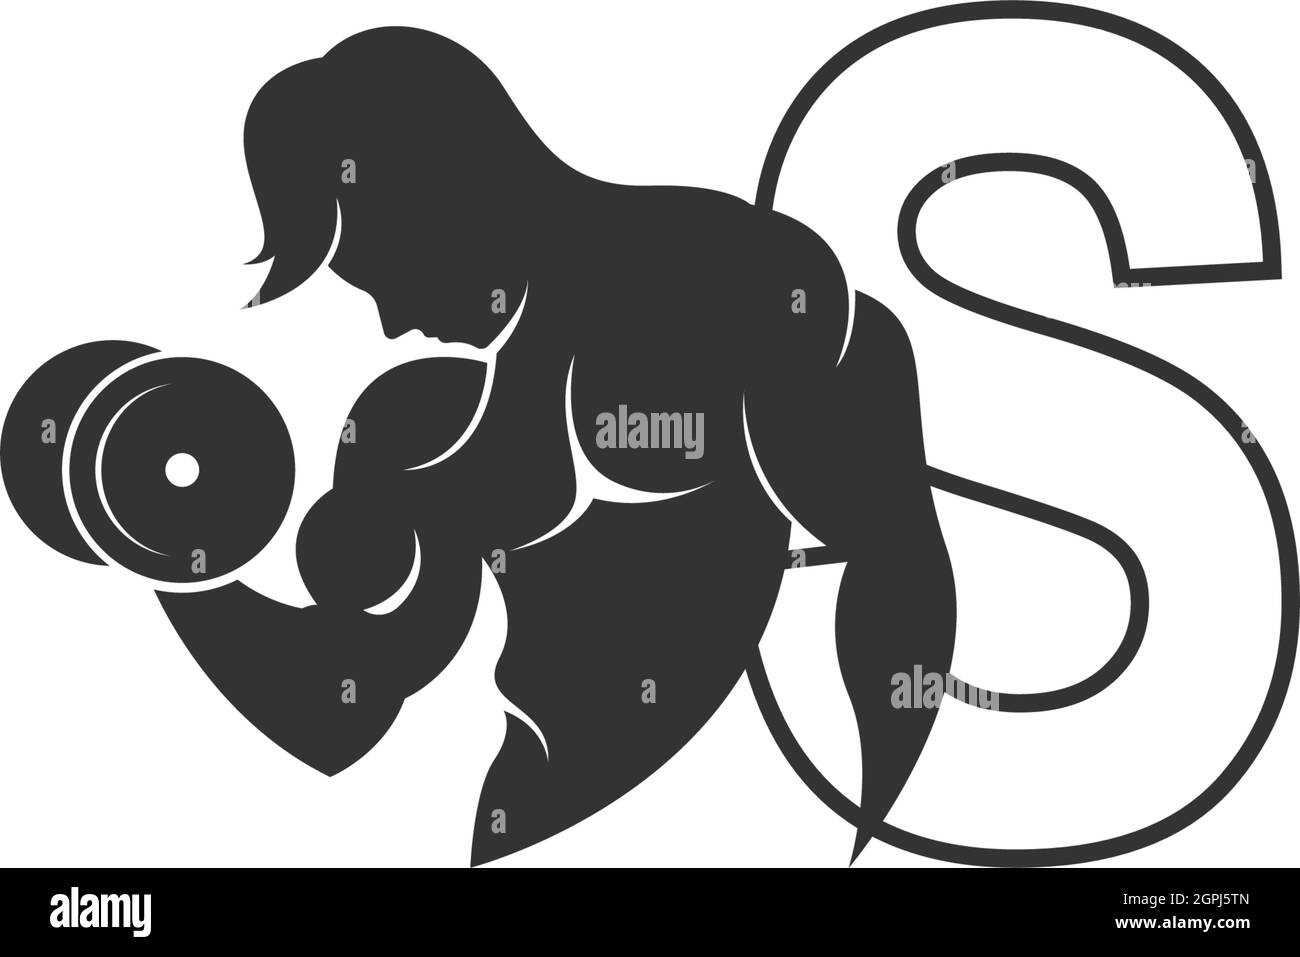 Letter S logo icon with a person holding barbell design vector Stock Vector